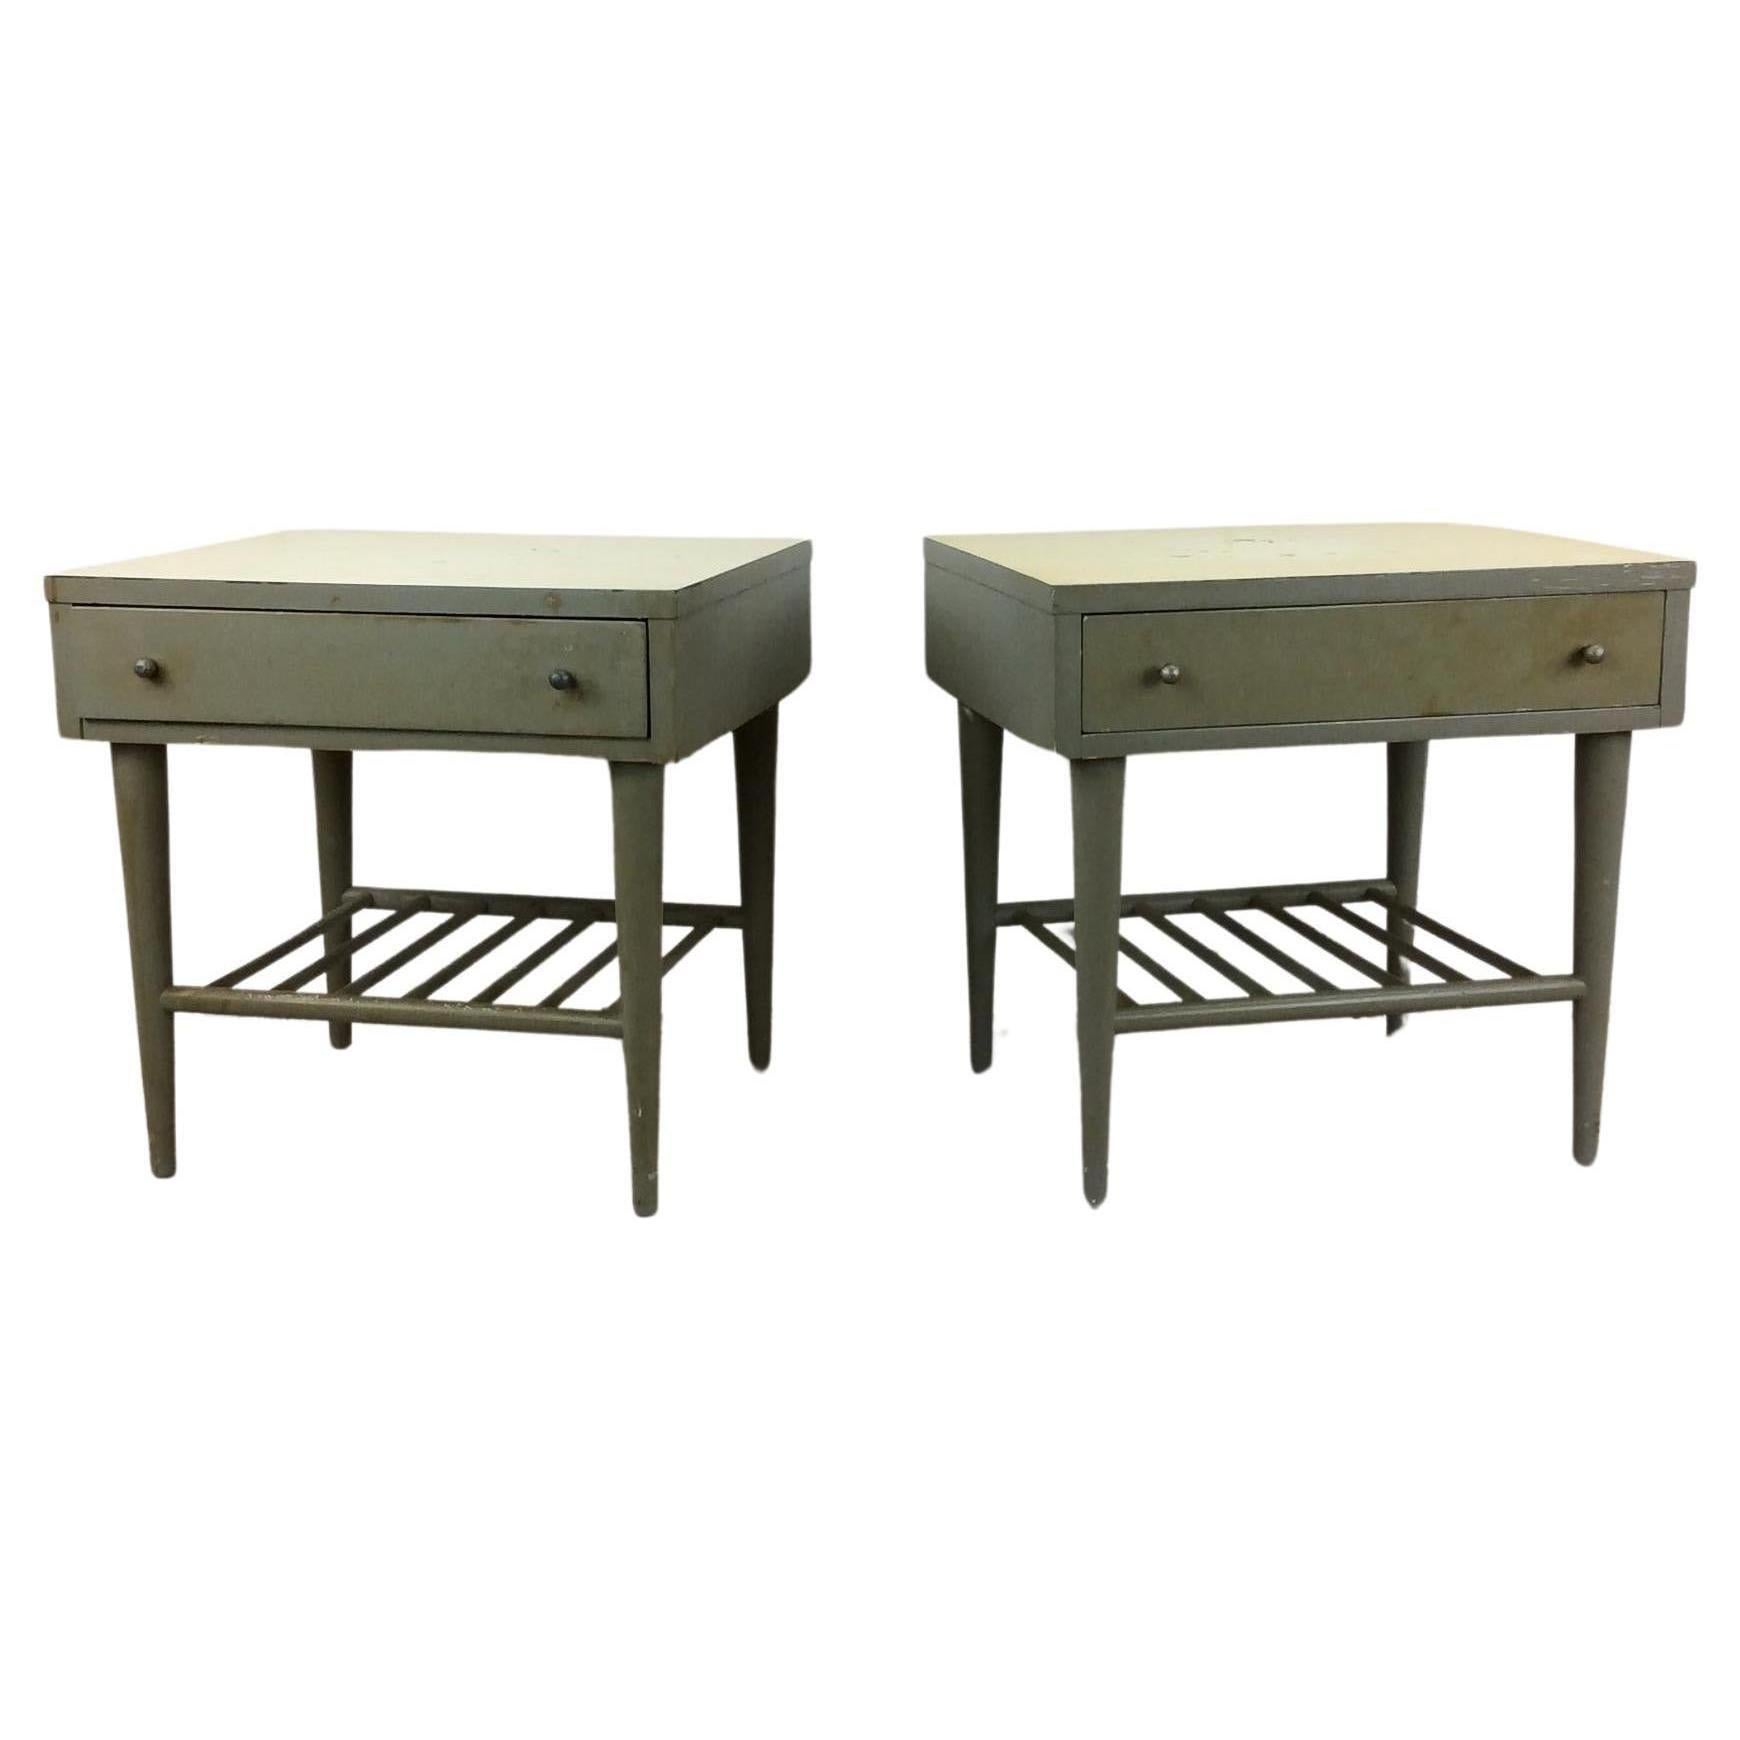 Pair of Mid Century Modern Nightstands by American of Martinsville